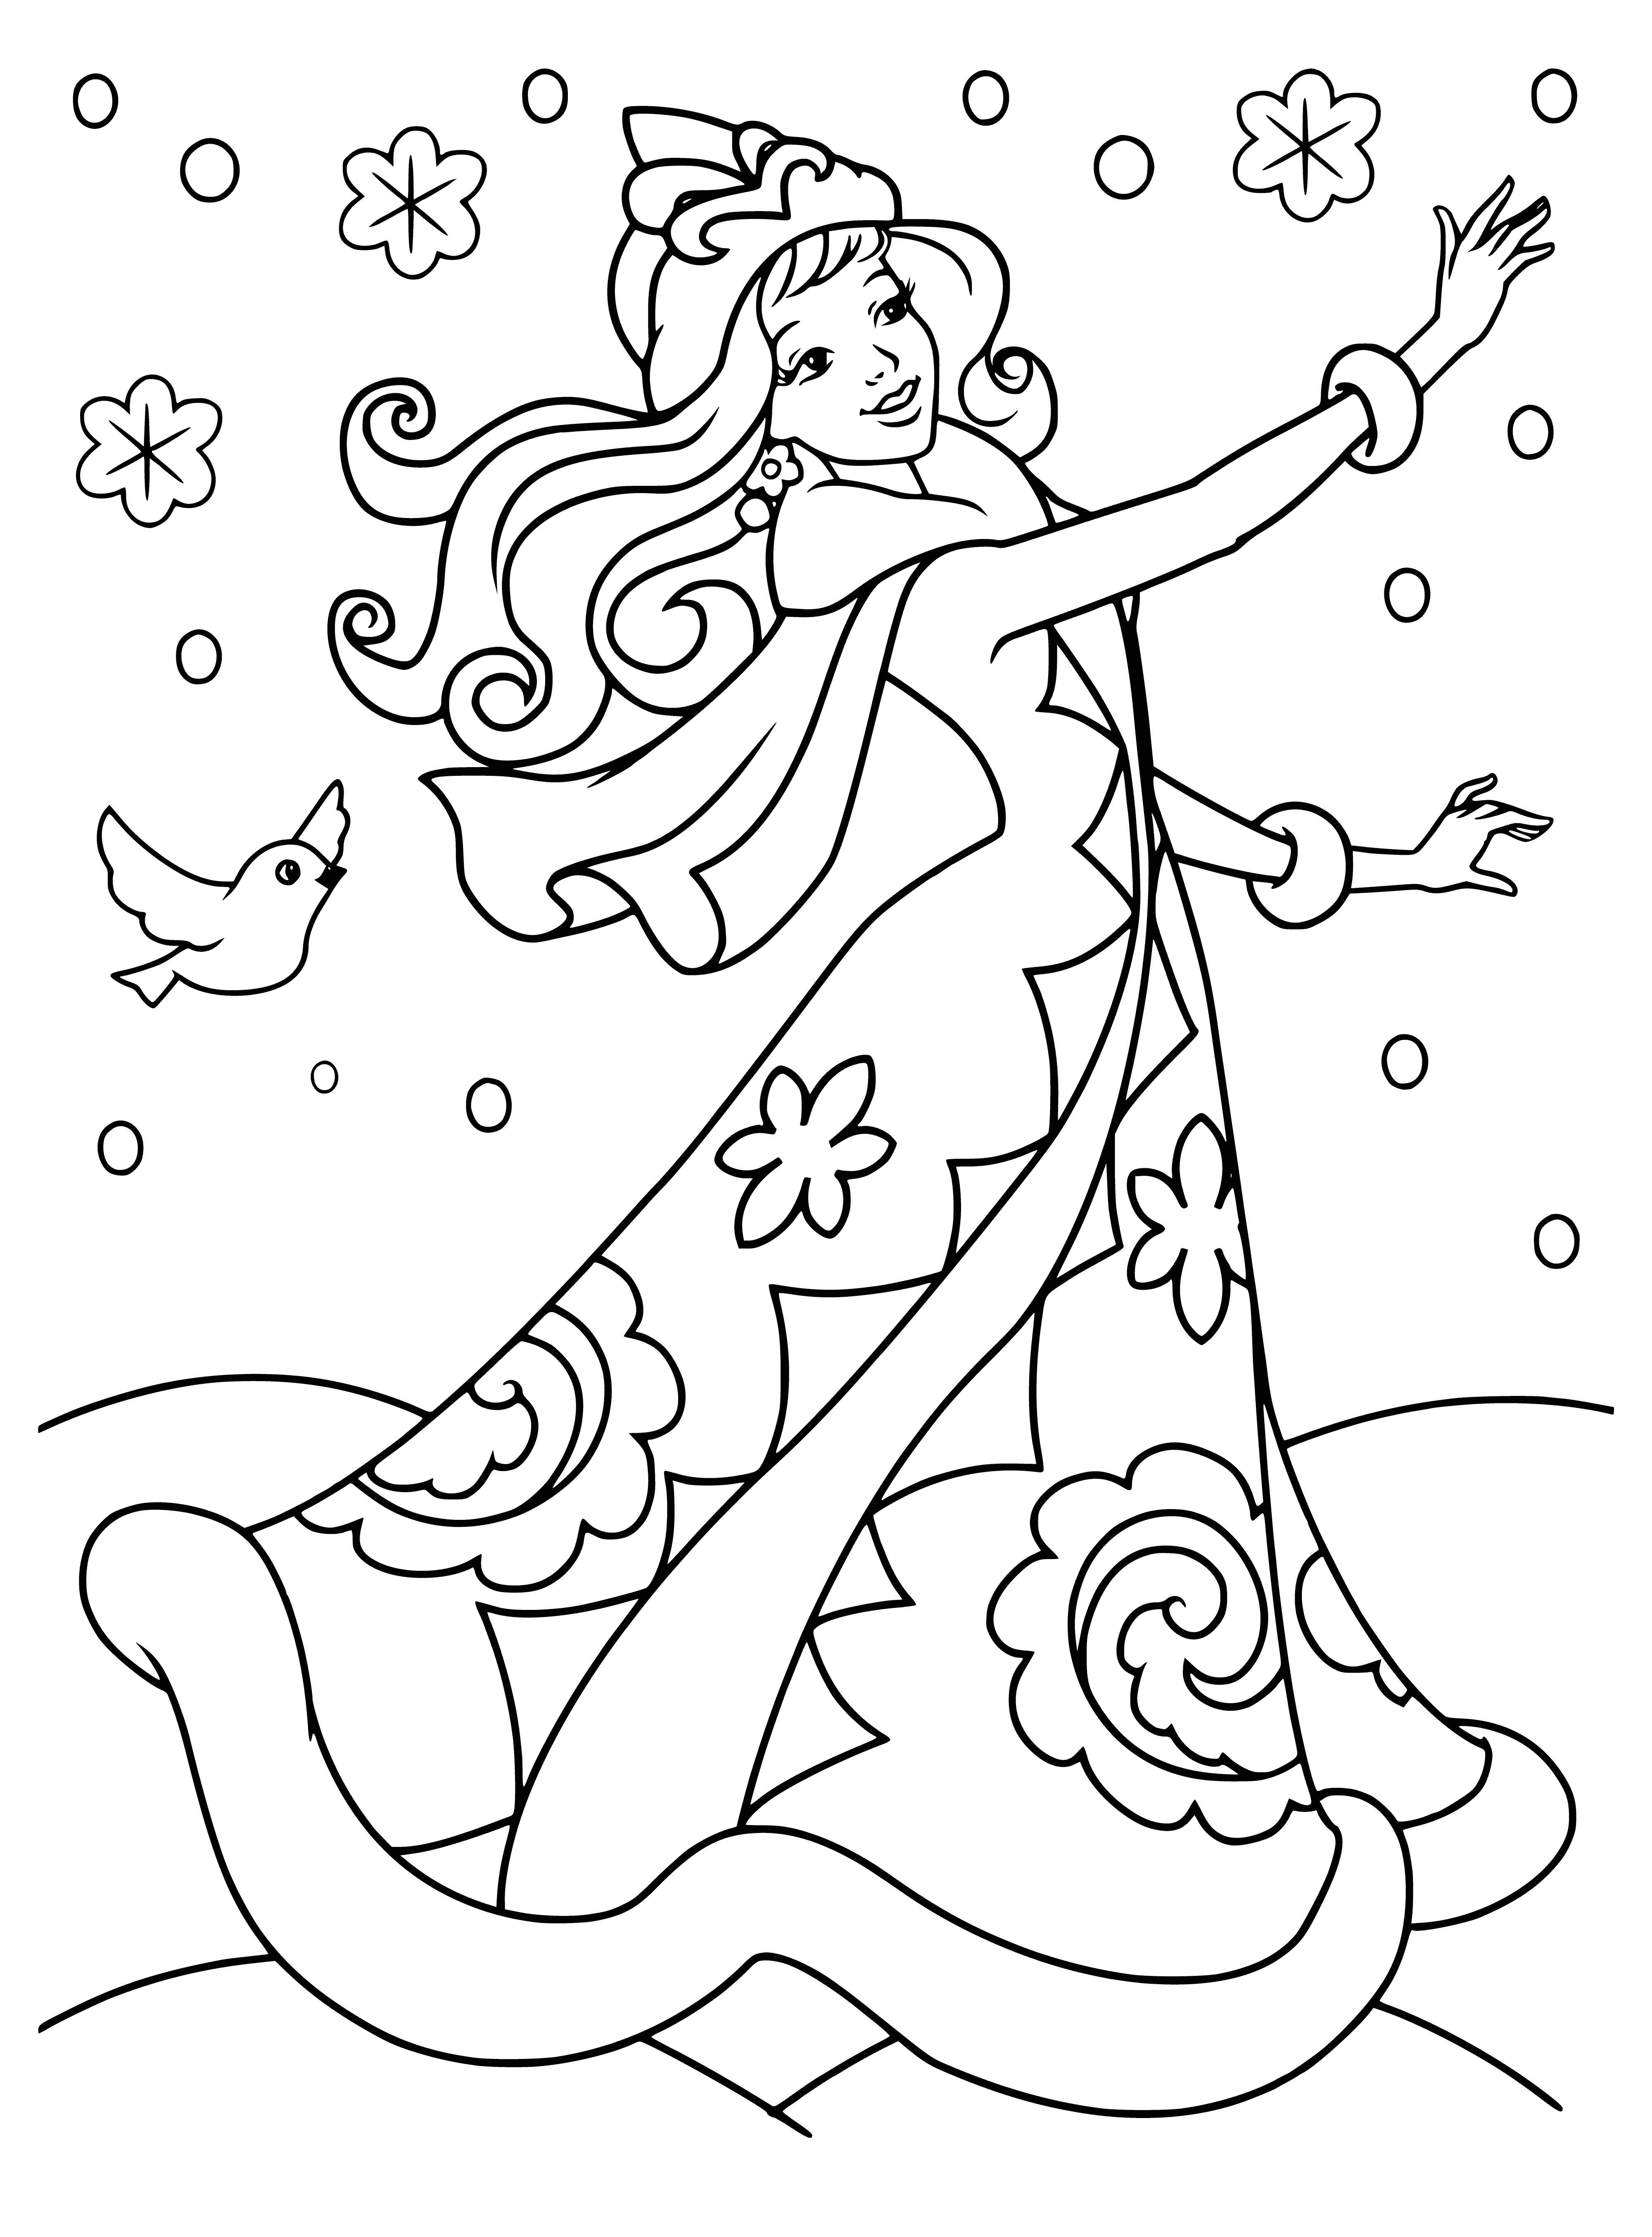 coloring page: Pretty girl in white dress stands in a snowy landscape, wreath in hair & fur-lined cloak, tall fir trees & mountains in the distance.